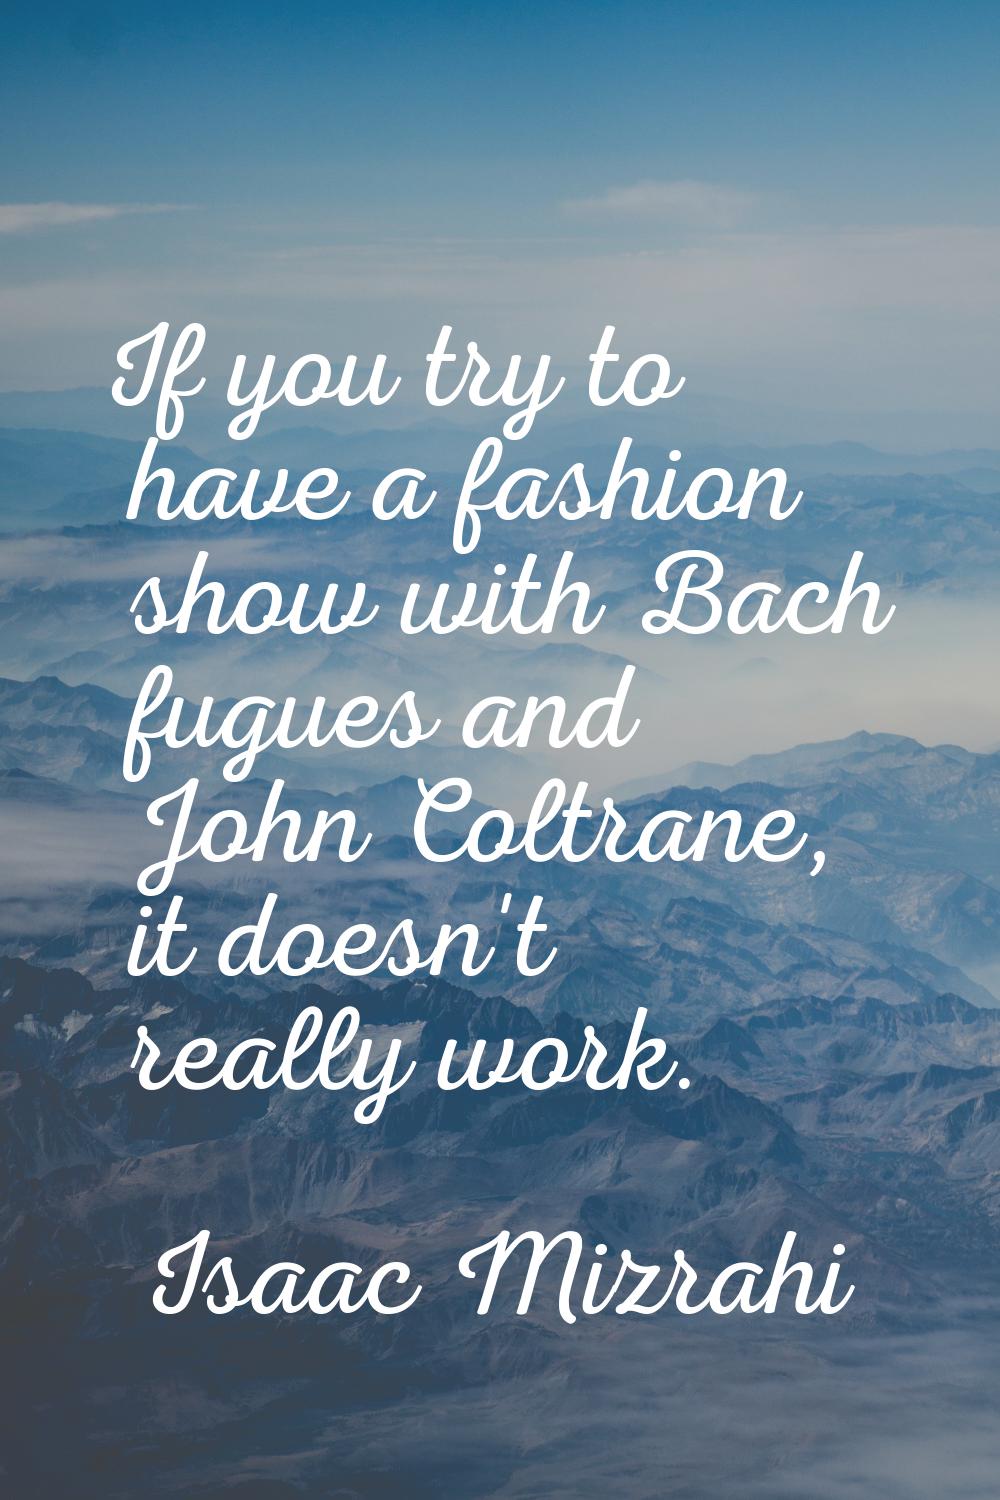 If you try to have a fashion show with Bach fugues and John Coltrane, it doesn't really work.